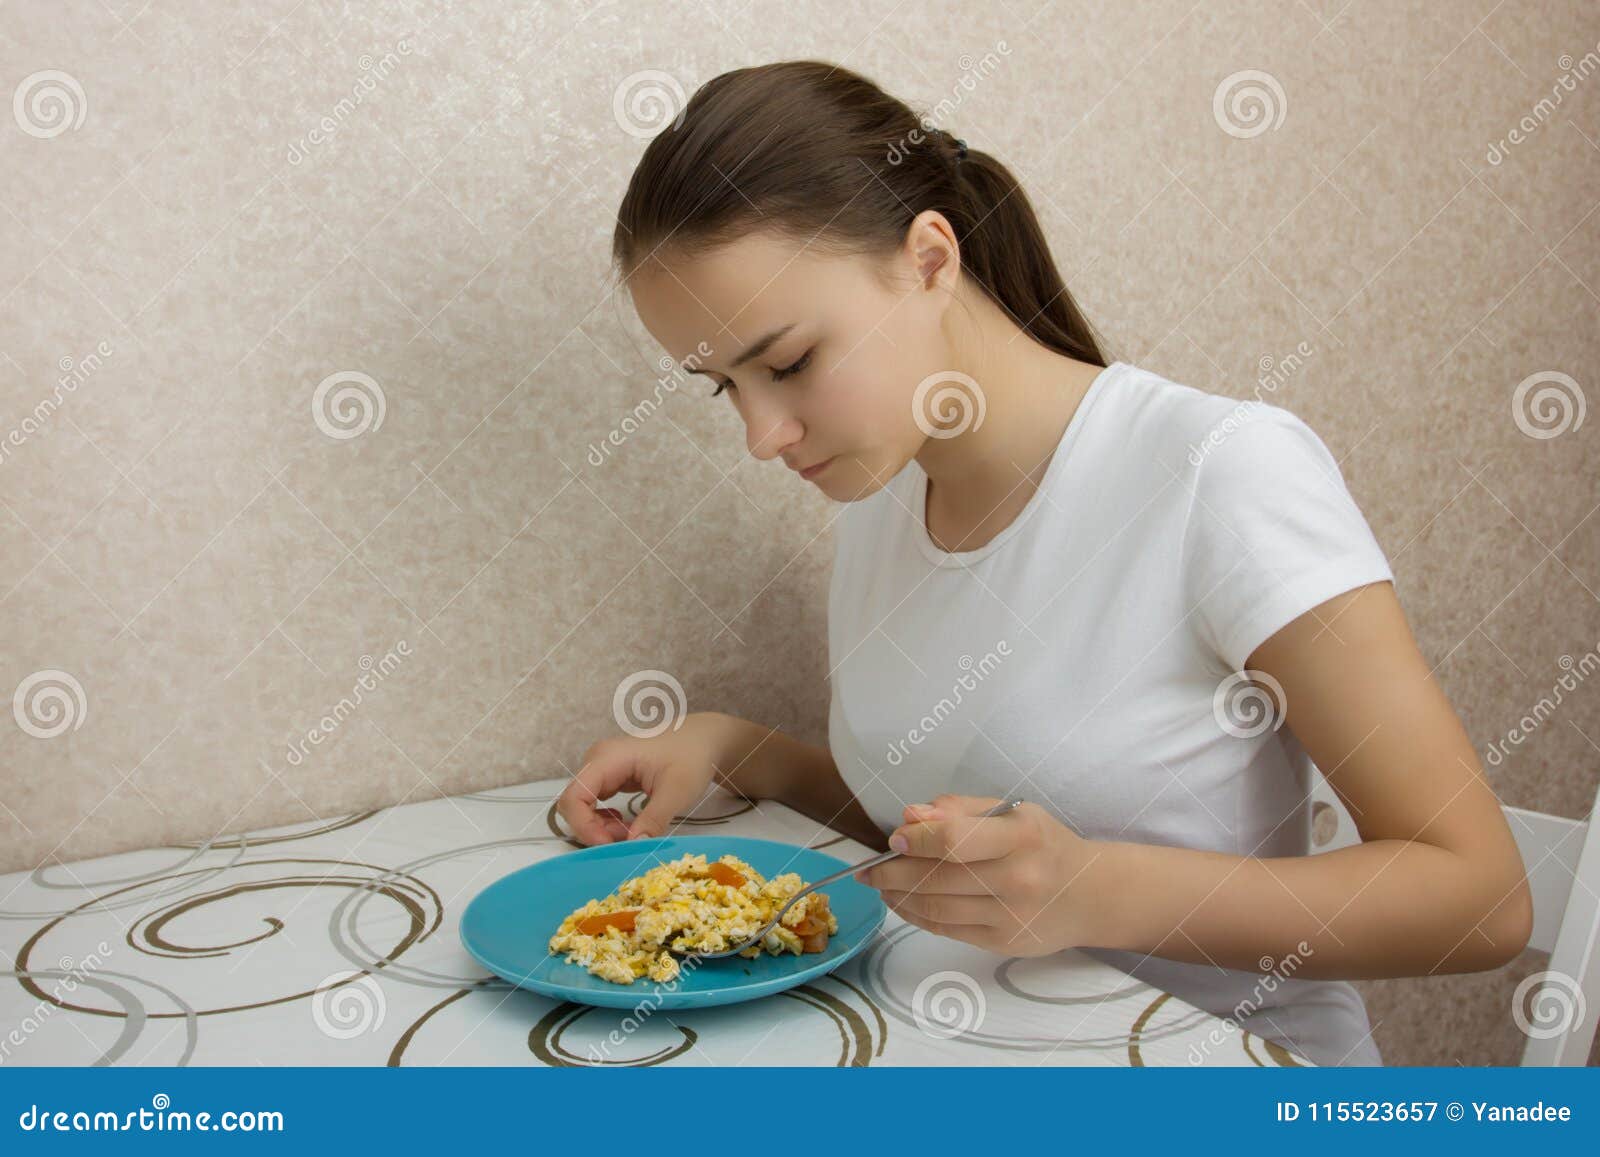 Young European Girl with Long Hair Eating Eggs Stock Image - Image of home,  food: 115523657